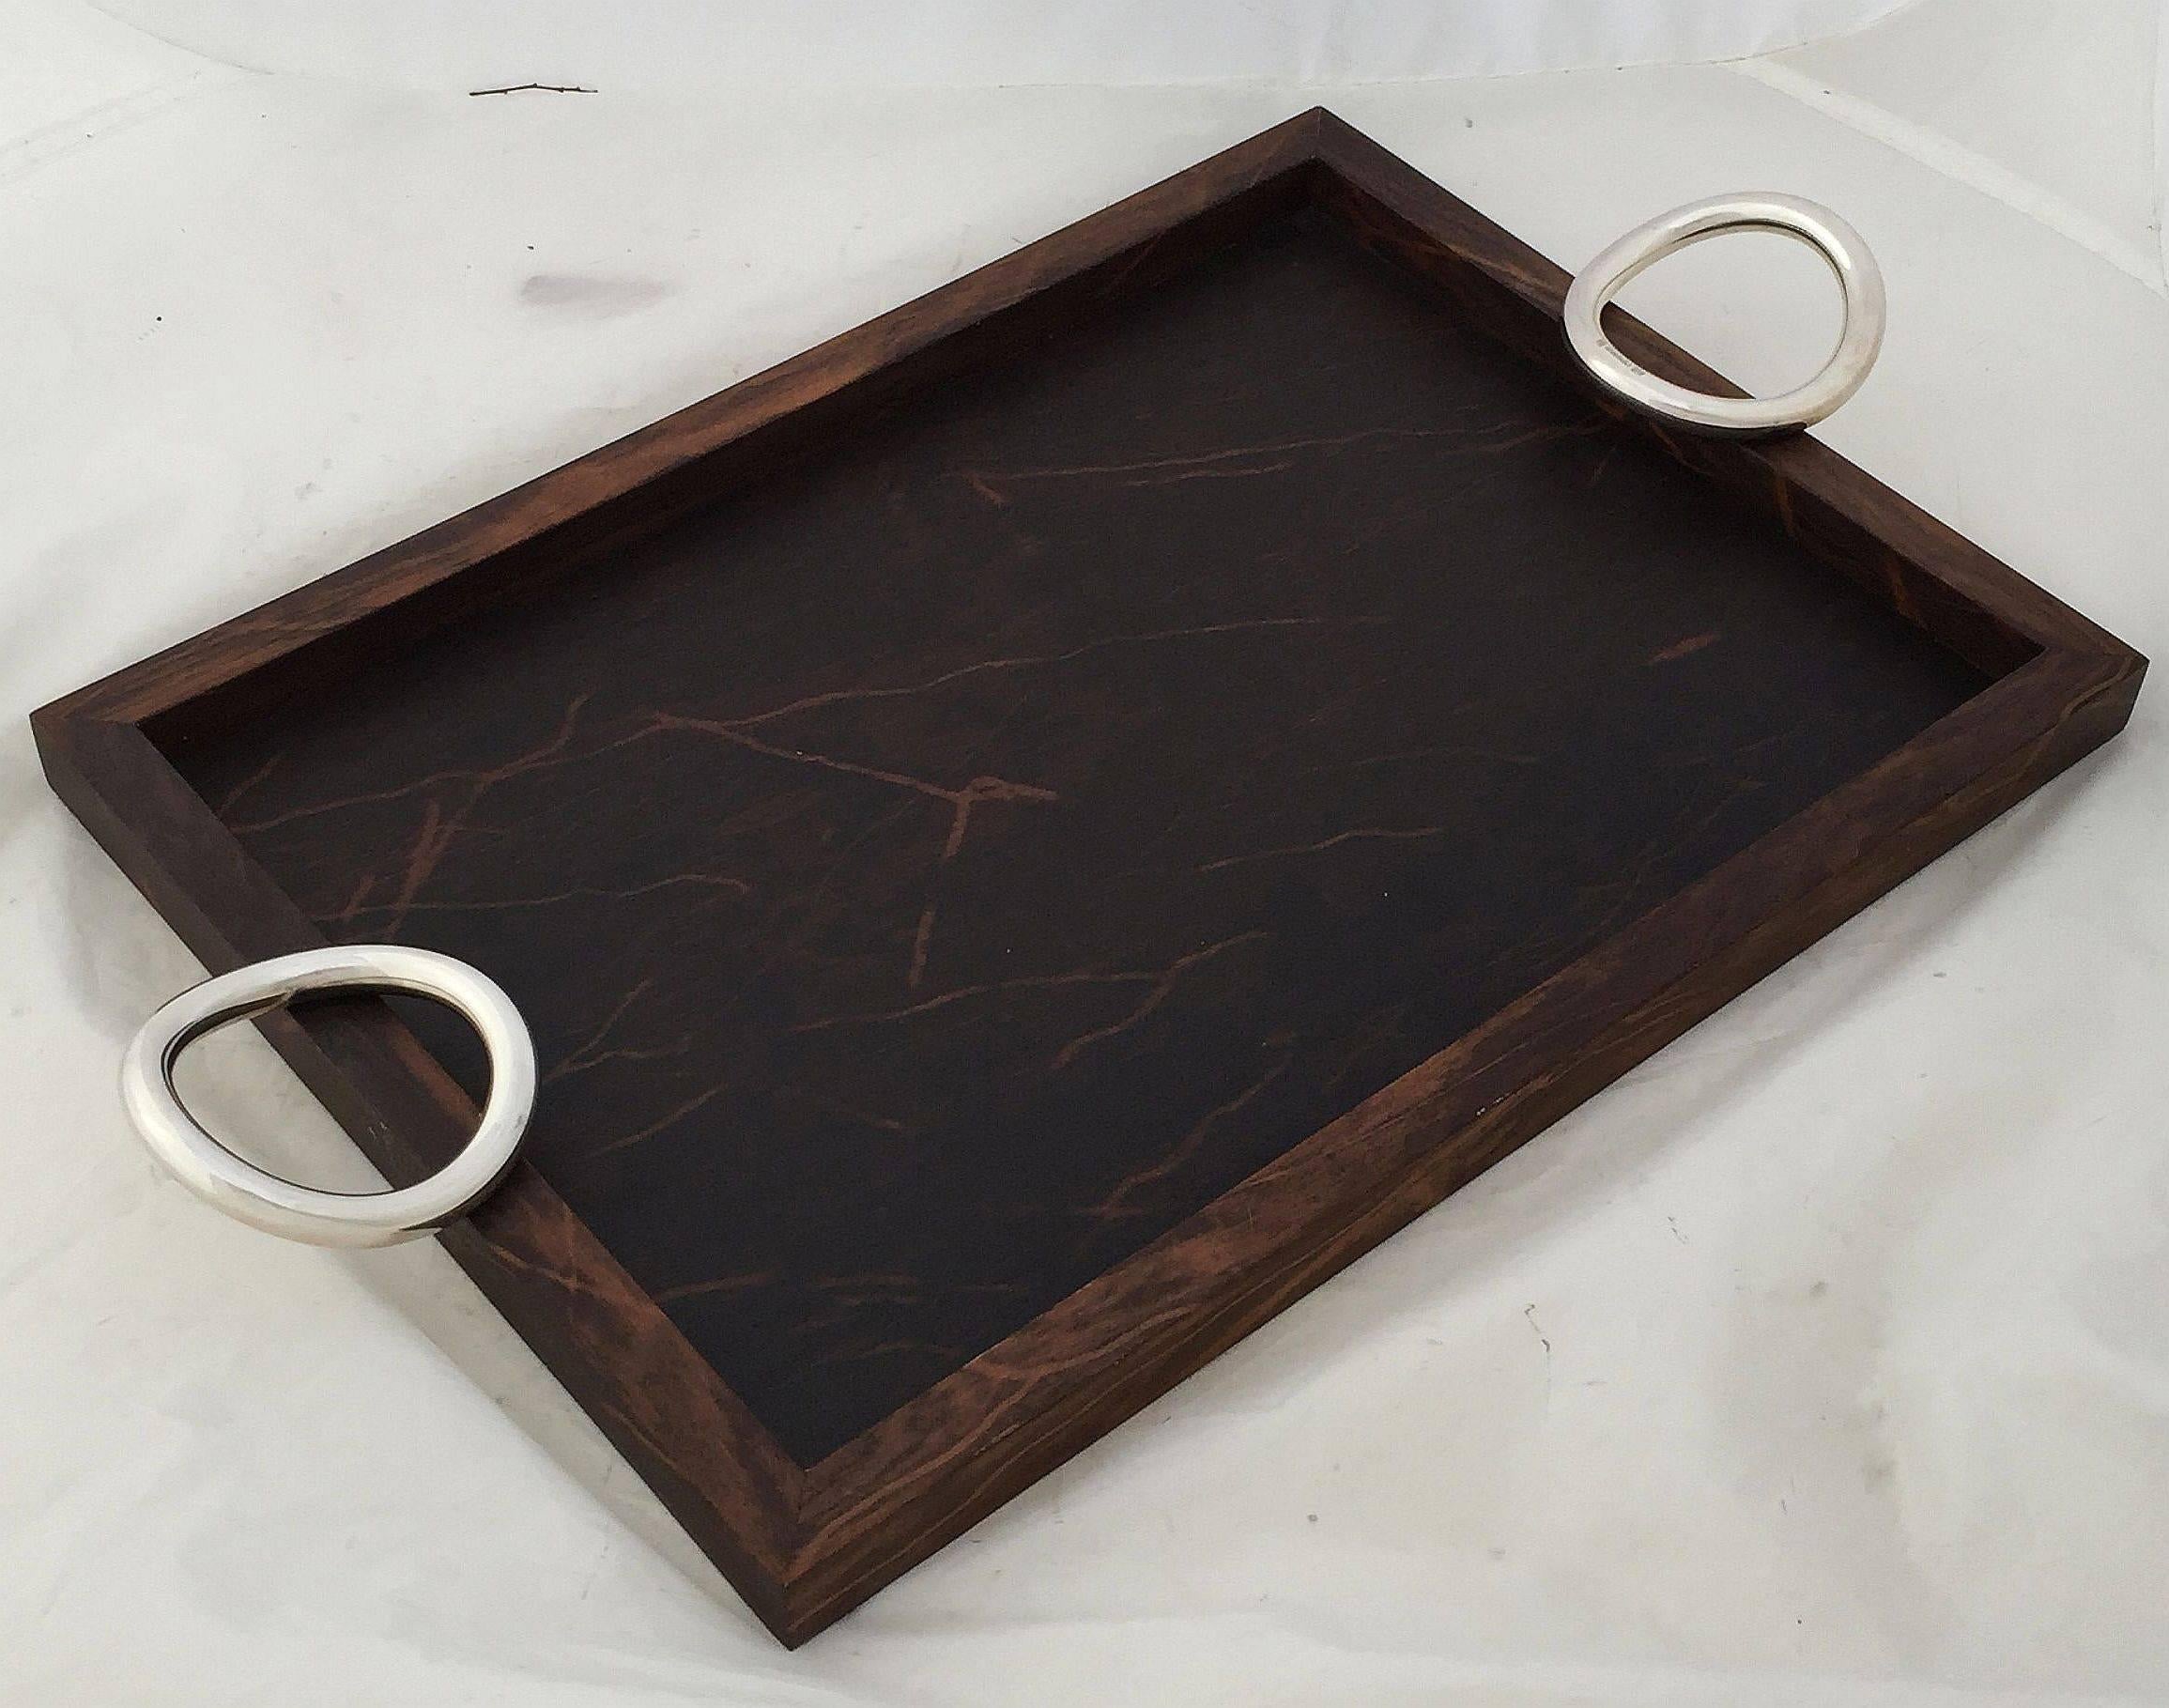 A handsome rectangular serving tray by the celebrated French design company, Christofle, featuring a design of wood with silver ring handles by Andrée Putnam.

Andrée Putman (23 December 1925 – 19 January 2013) was an important French interior